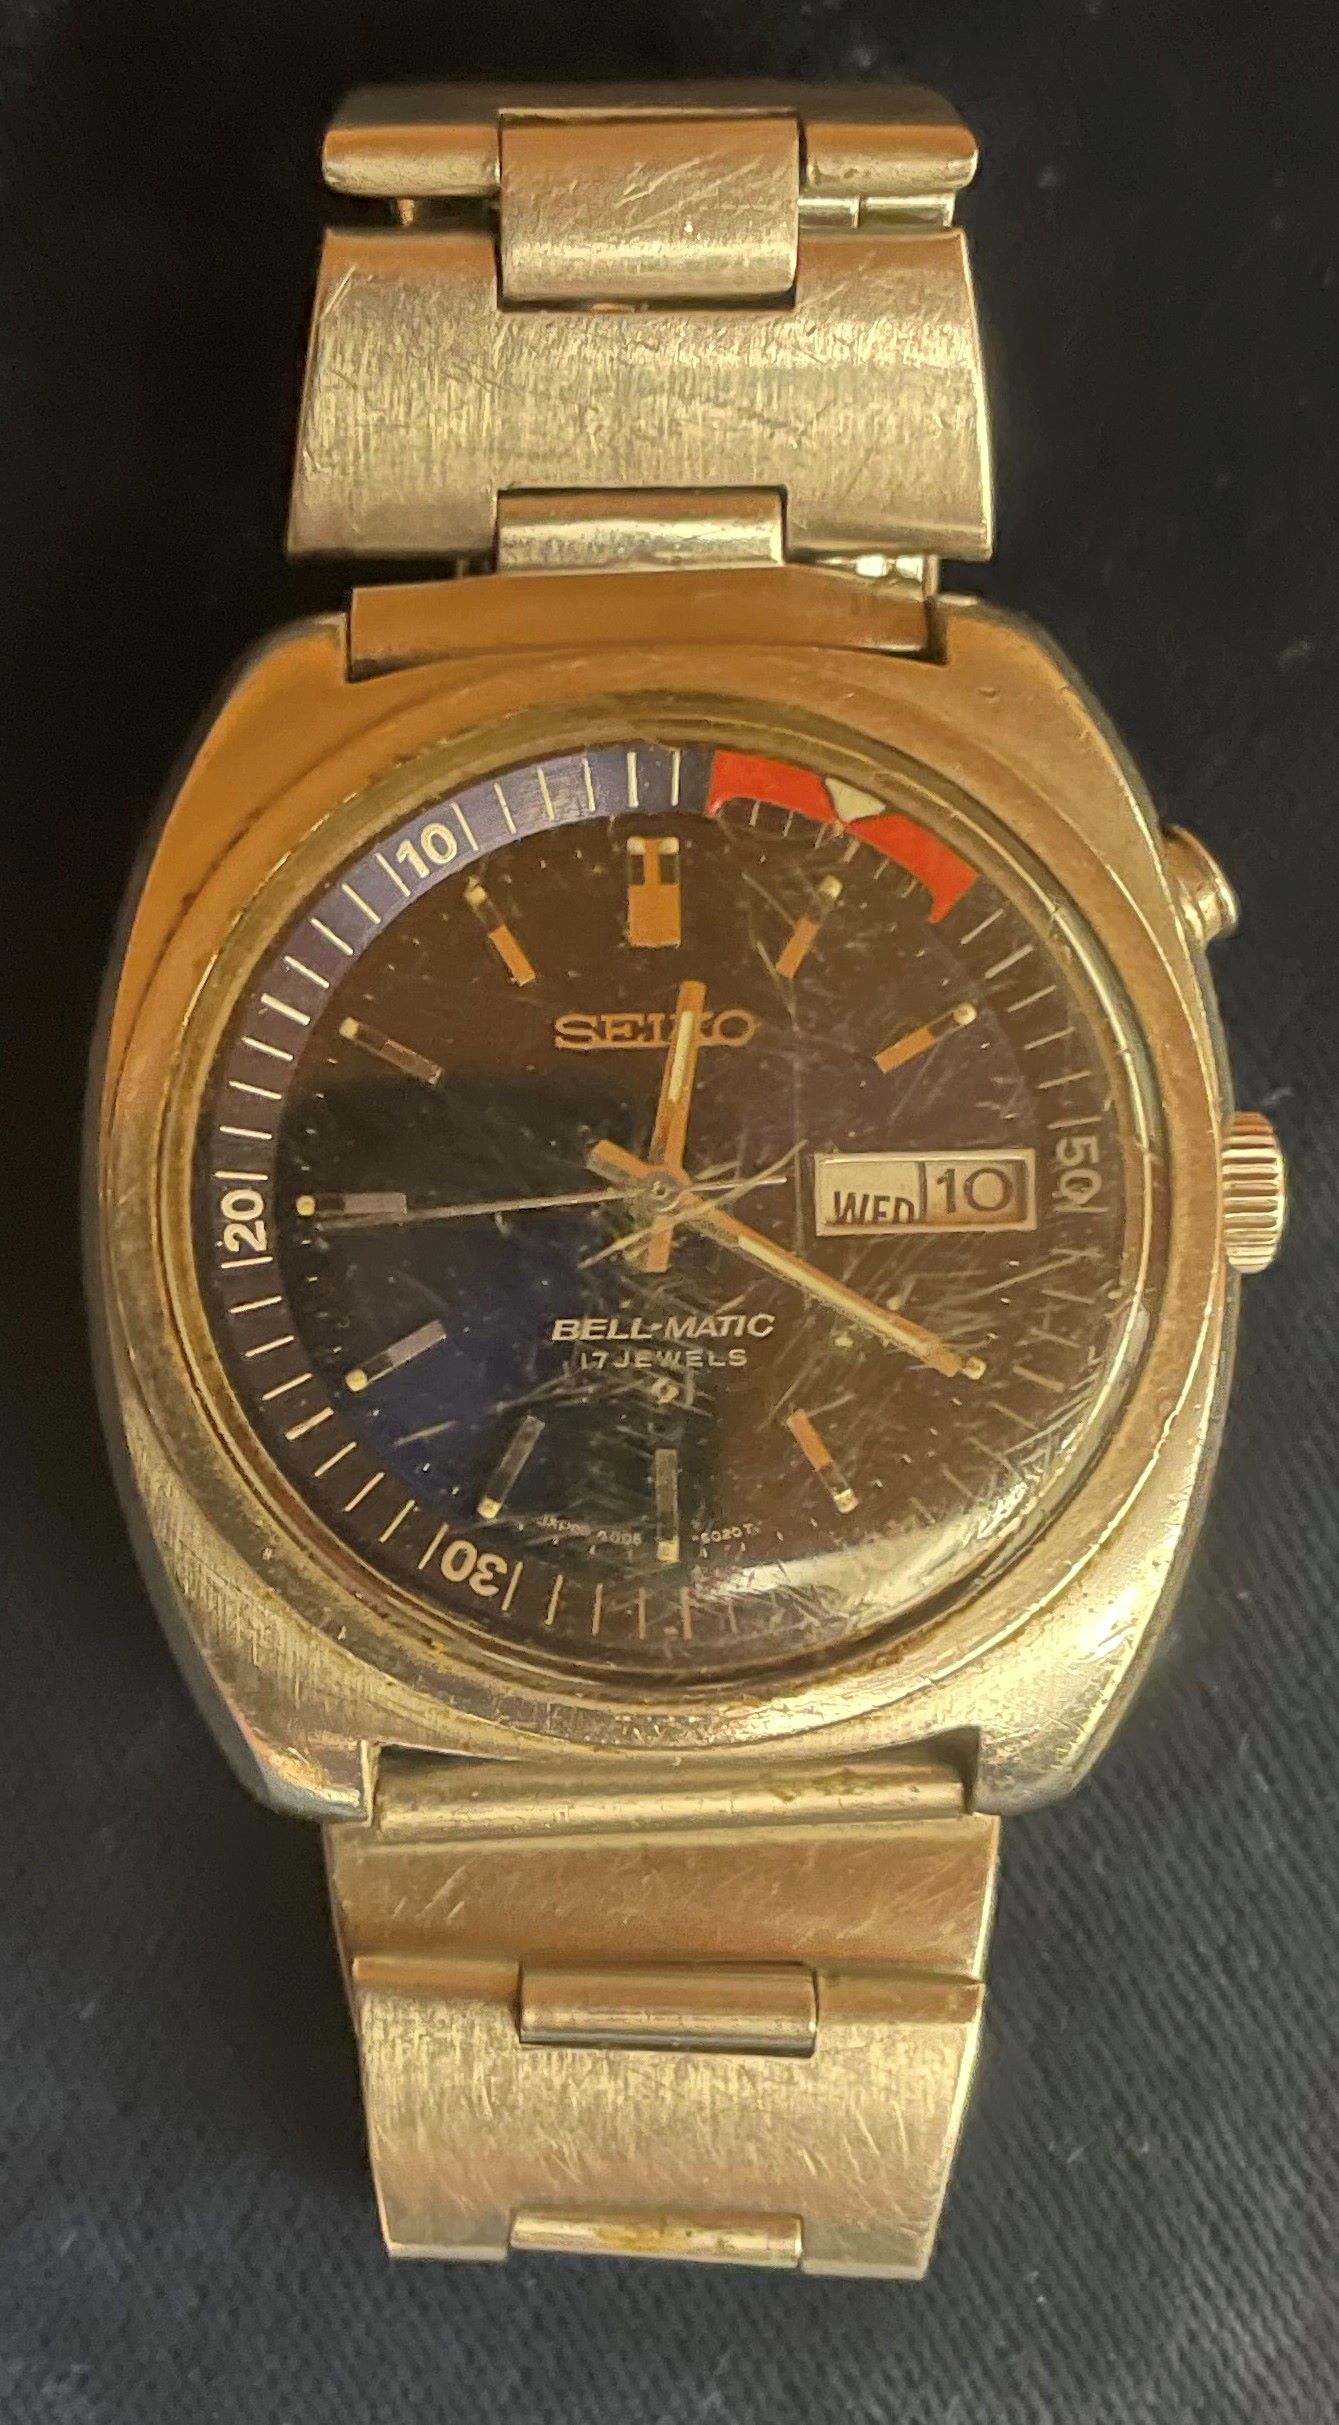 Vintage Seiko Bell-Matic gents alarm wristwatch in a steel case with automatic movement, blue - Image 2 of 5